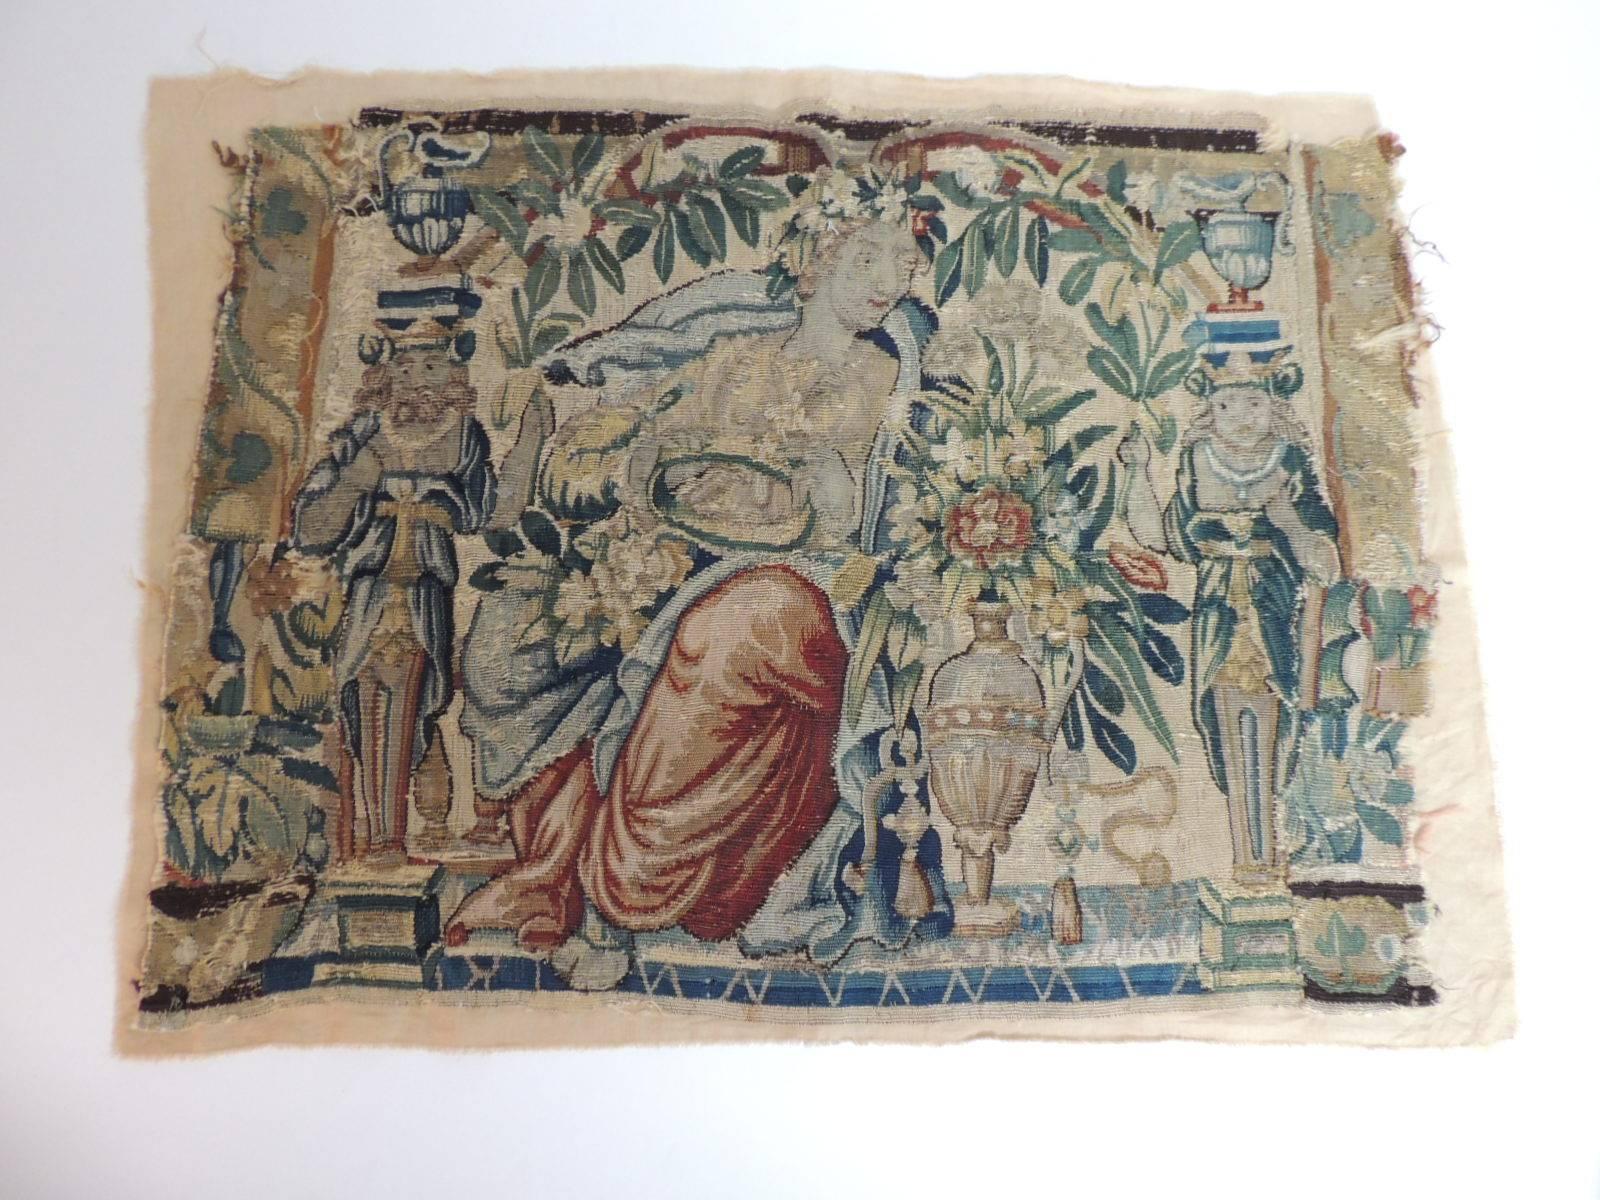 From: Antique Textiles Galleries
Aubusson tapestry panel depicting scene of a Goddess holding court. Framed by carved colorful statues of men and a women in regal clothing. The overall flora around it is bright color branches and flowers in bloom.